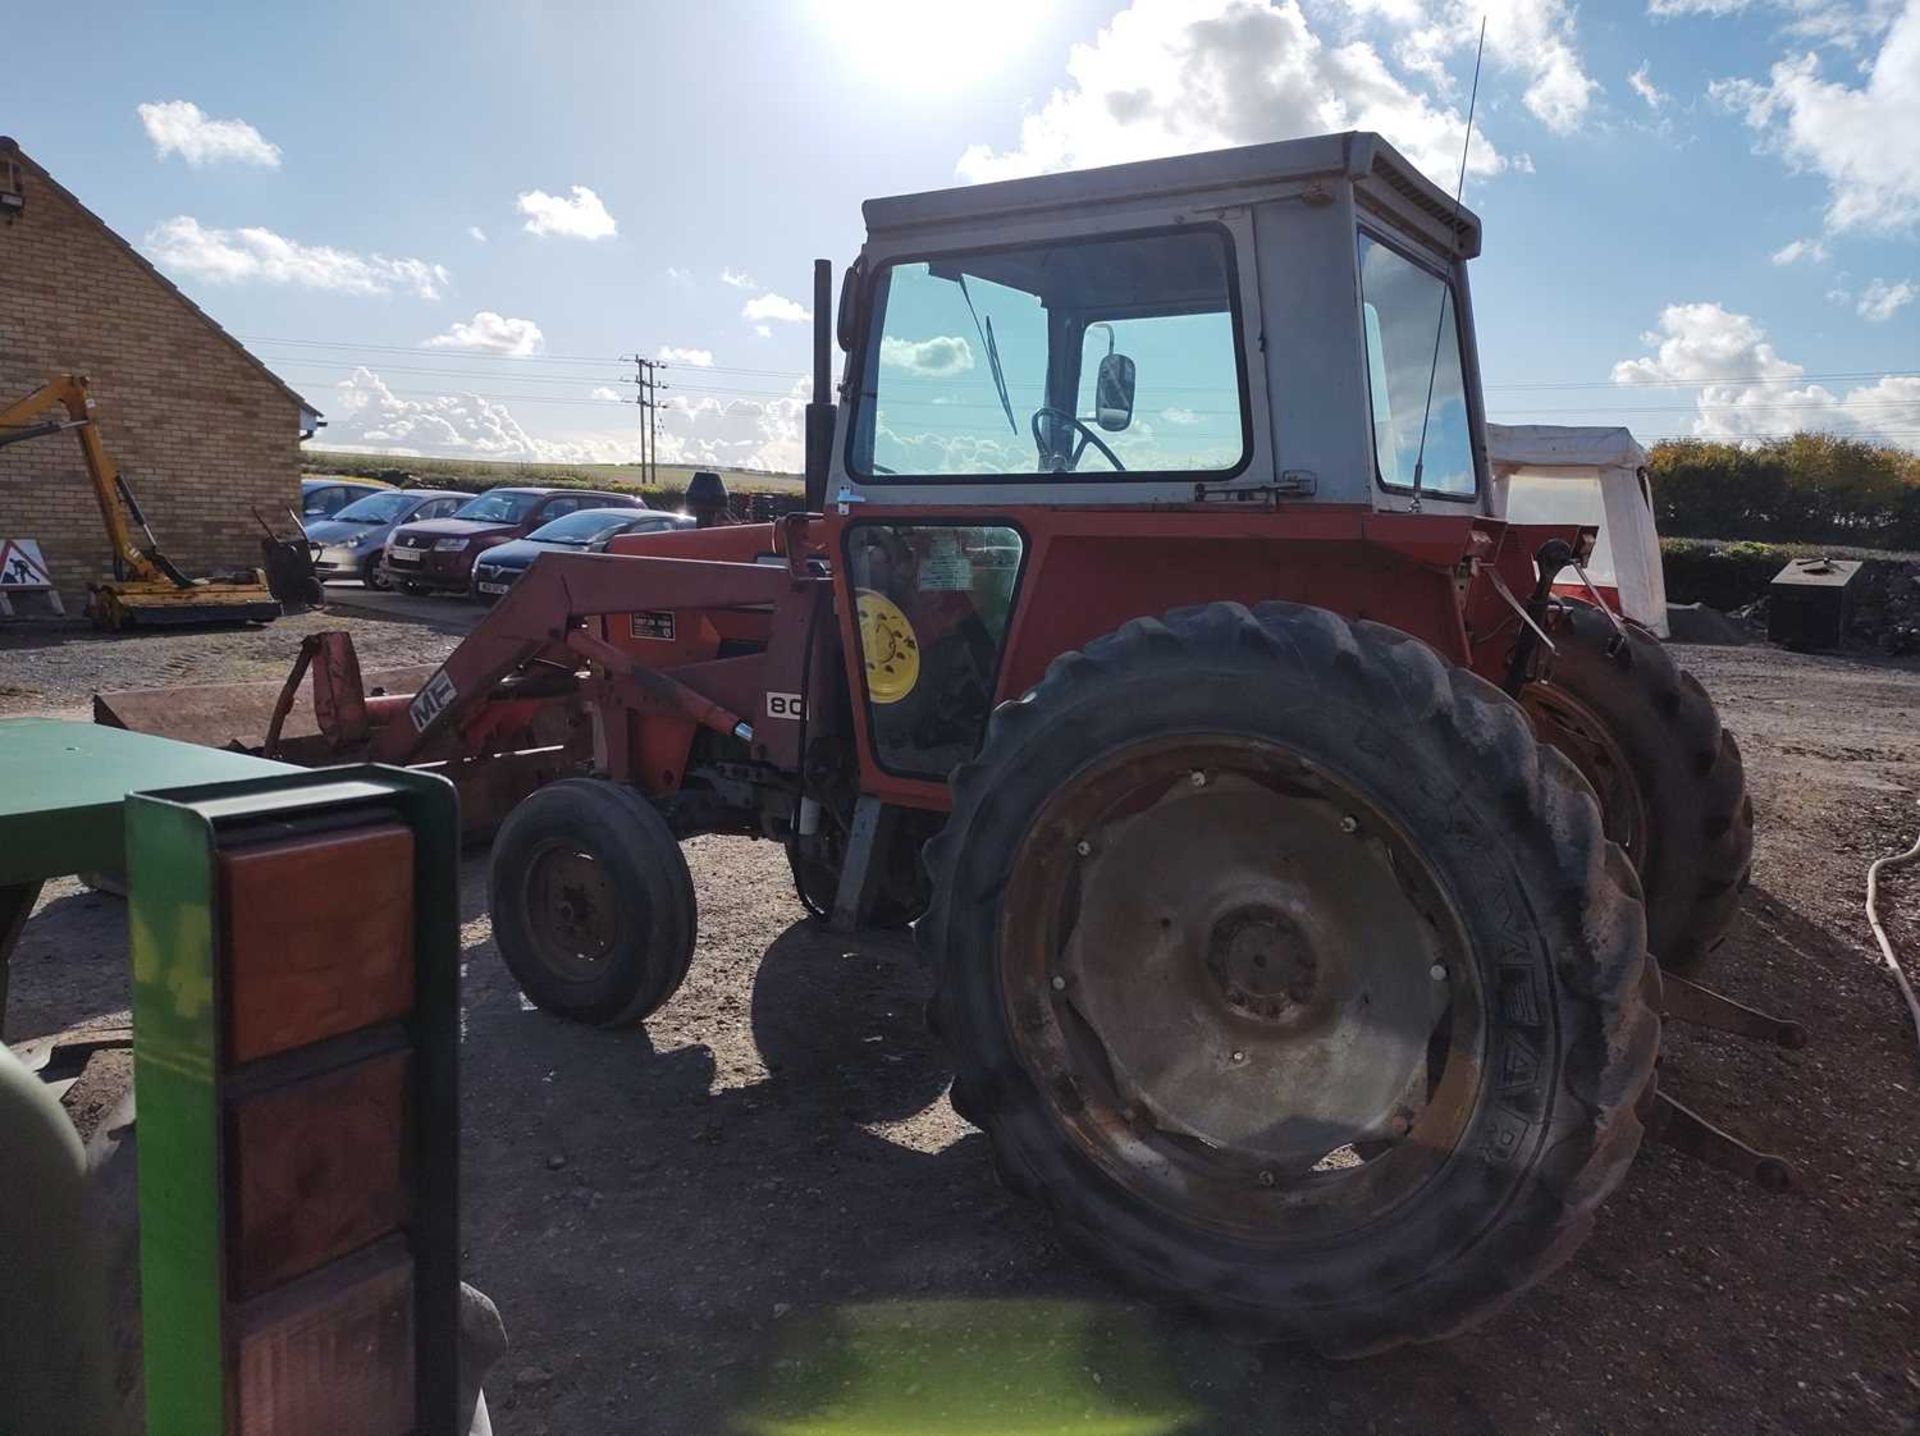 Massey Ferguson 590 Tractor with MF 80 Front Loader & Attachments. 5,573 Hrs. Reg: XVA 740T - Image 4 of 11